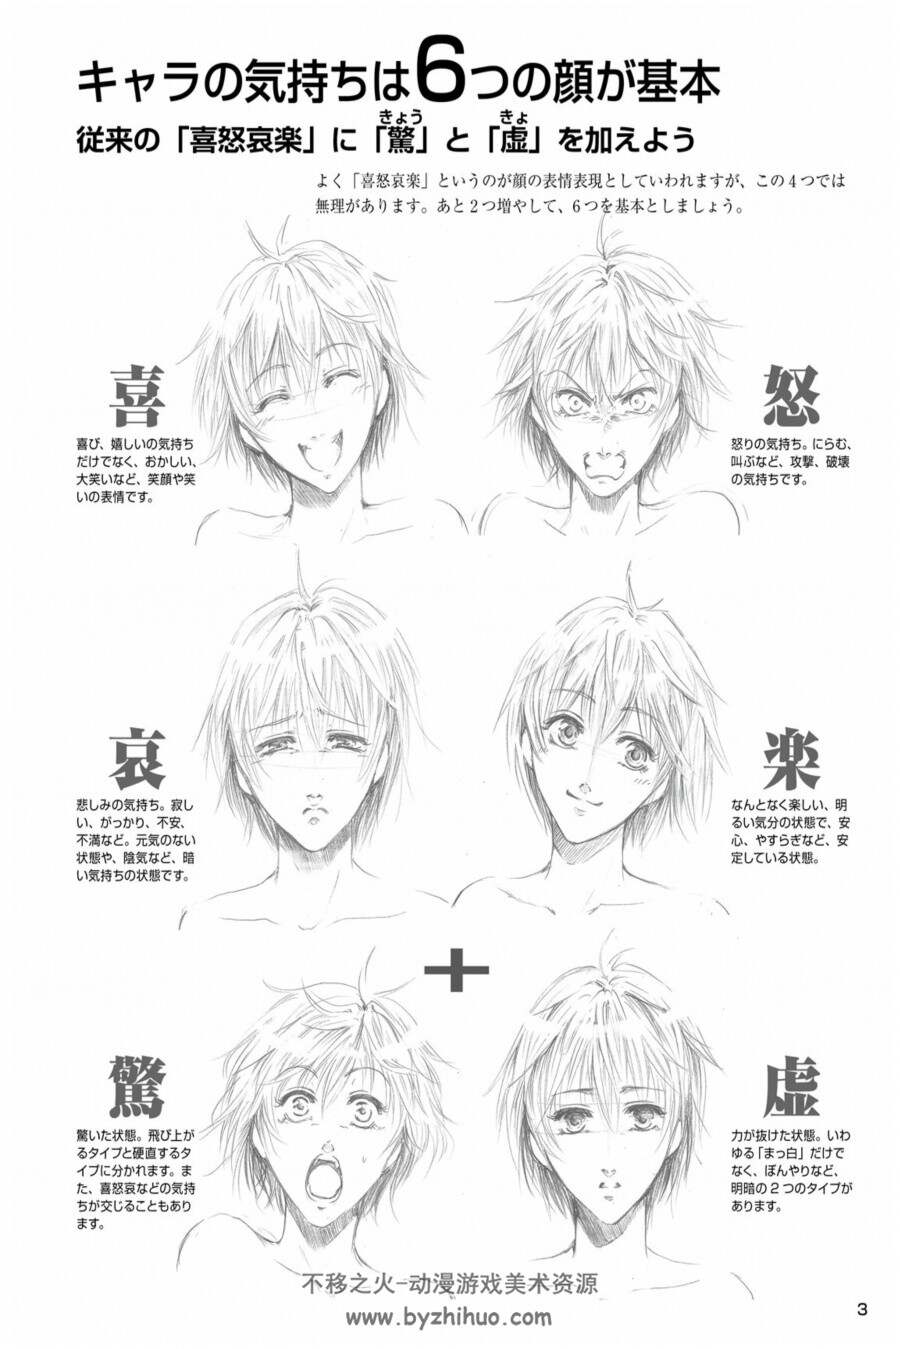 How to draw feelings of the characters 如何画出角色的情感 百度网盘下载